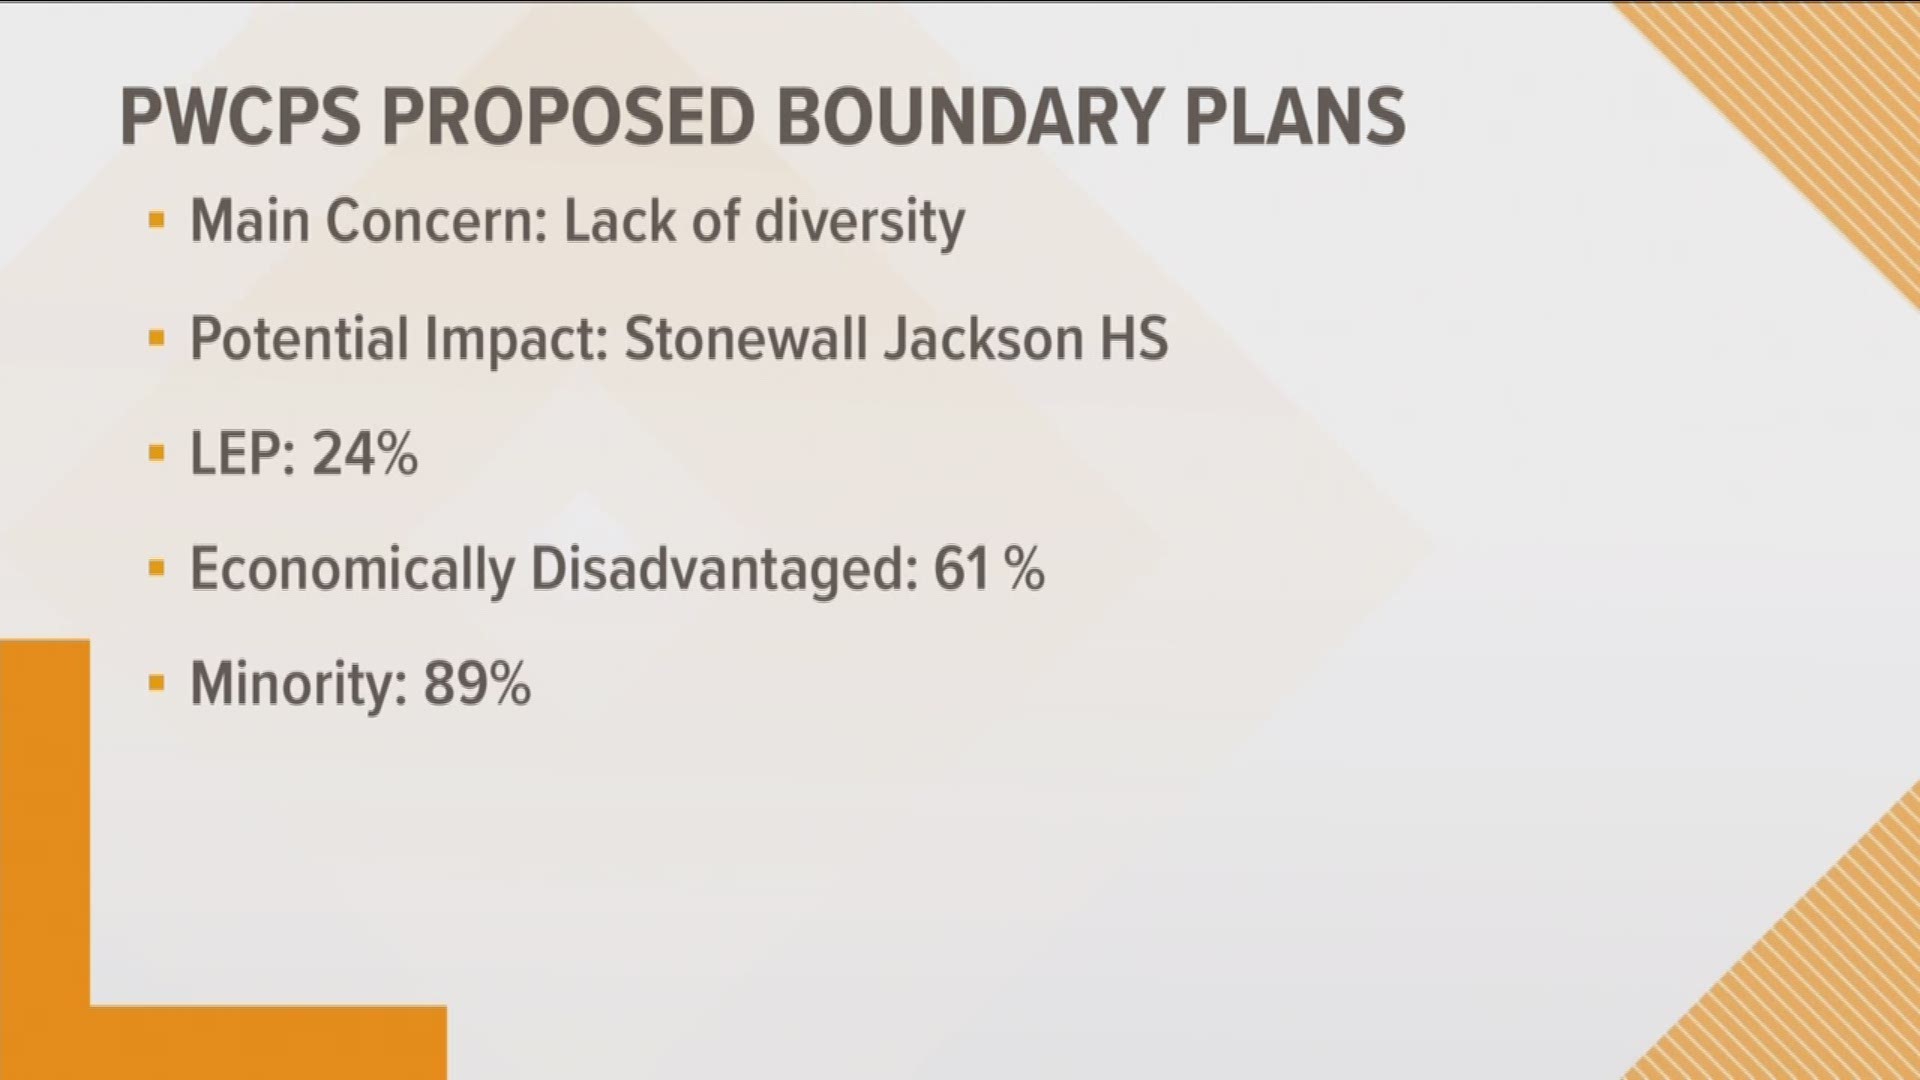 A hearing is being held in the western part of Prince William County for the new school opening in 2021. The focus will be on the boundary to determine which students will go to this school. Some parents feel like their could be a lack of diversity at the school.